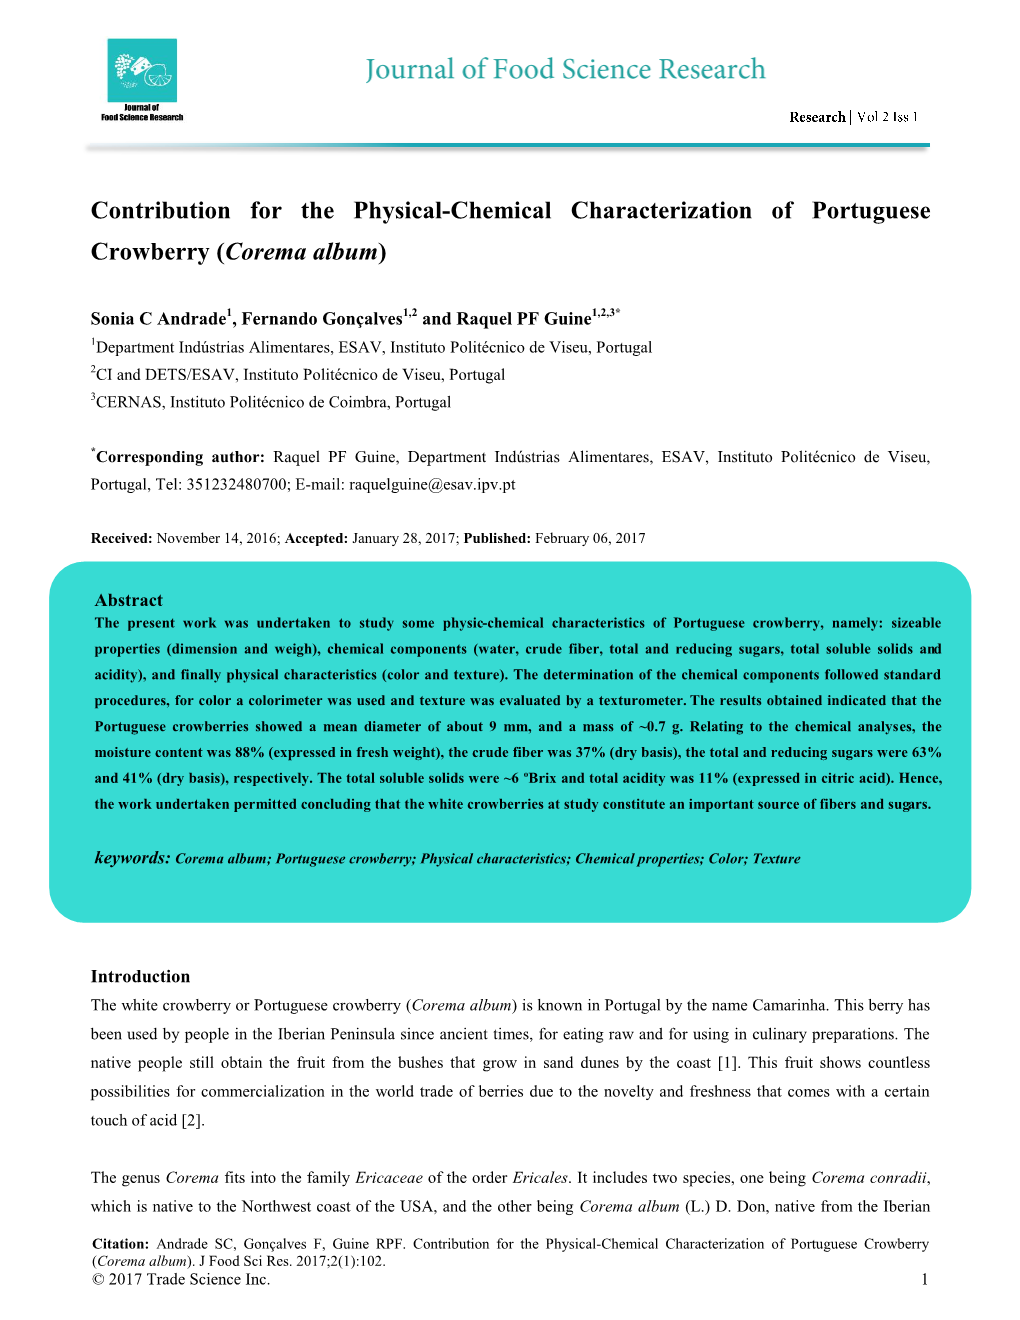 Contribution for the Physical-Chemical Characterization of Portuguese Crowberry (Corema Album)